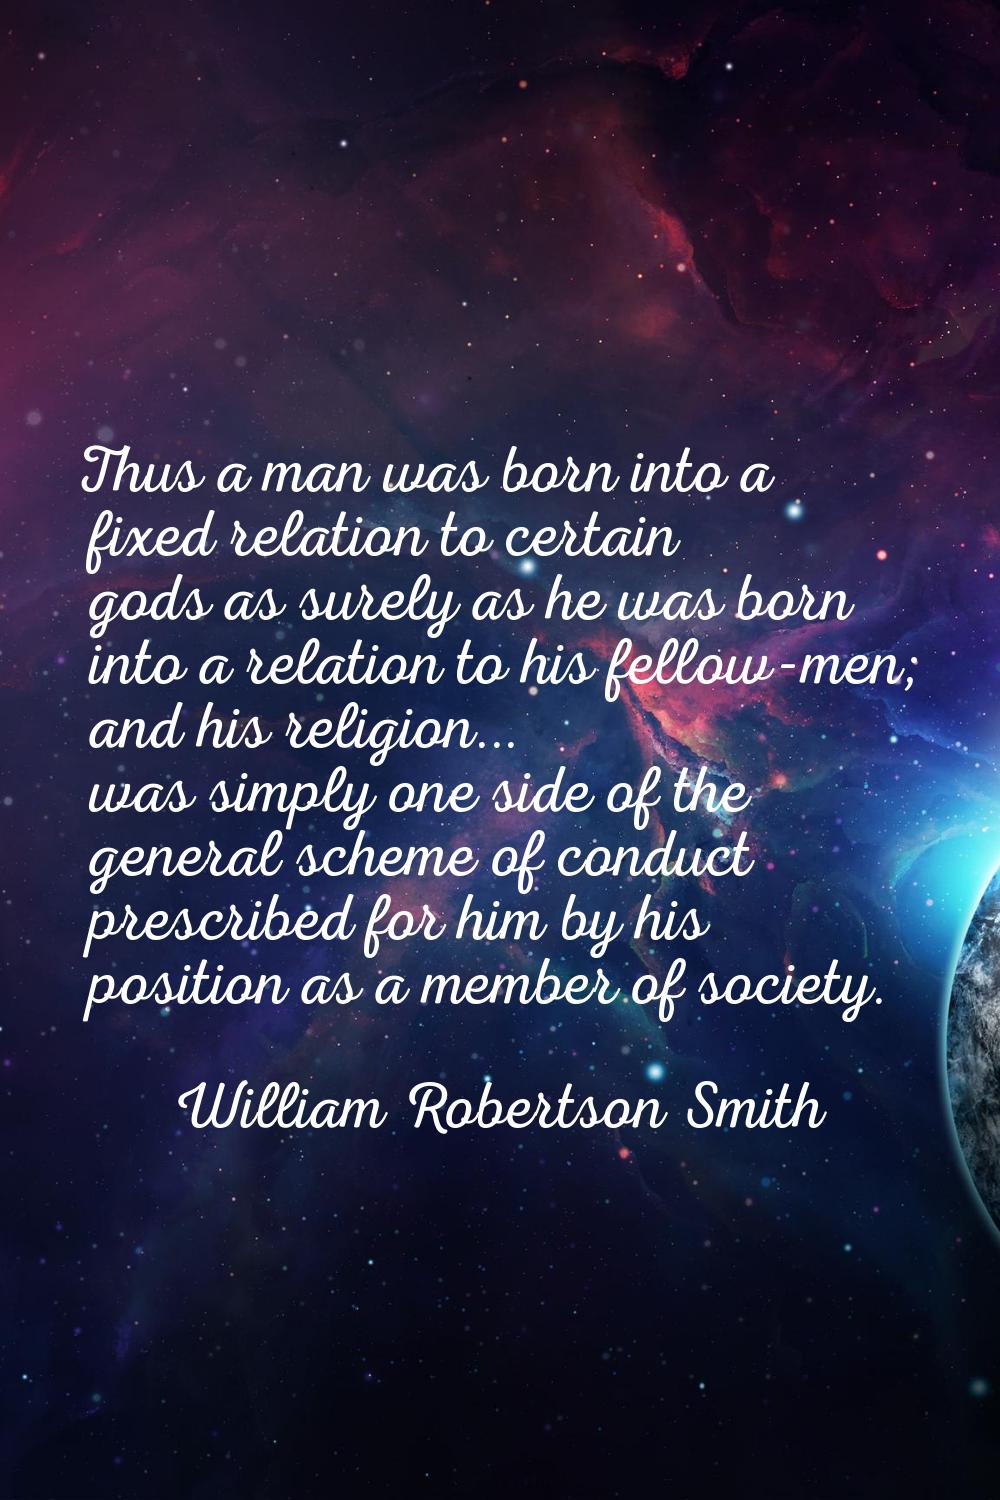 Thus a man was born into a fixed relation to certain gods as surely as he was born into a relation 